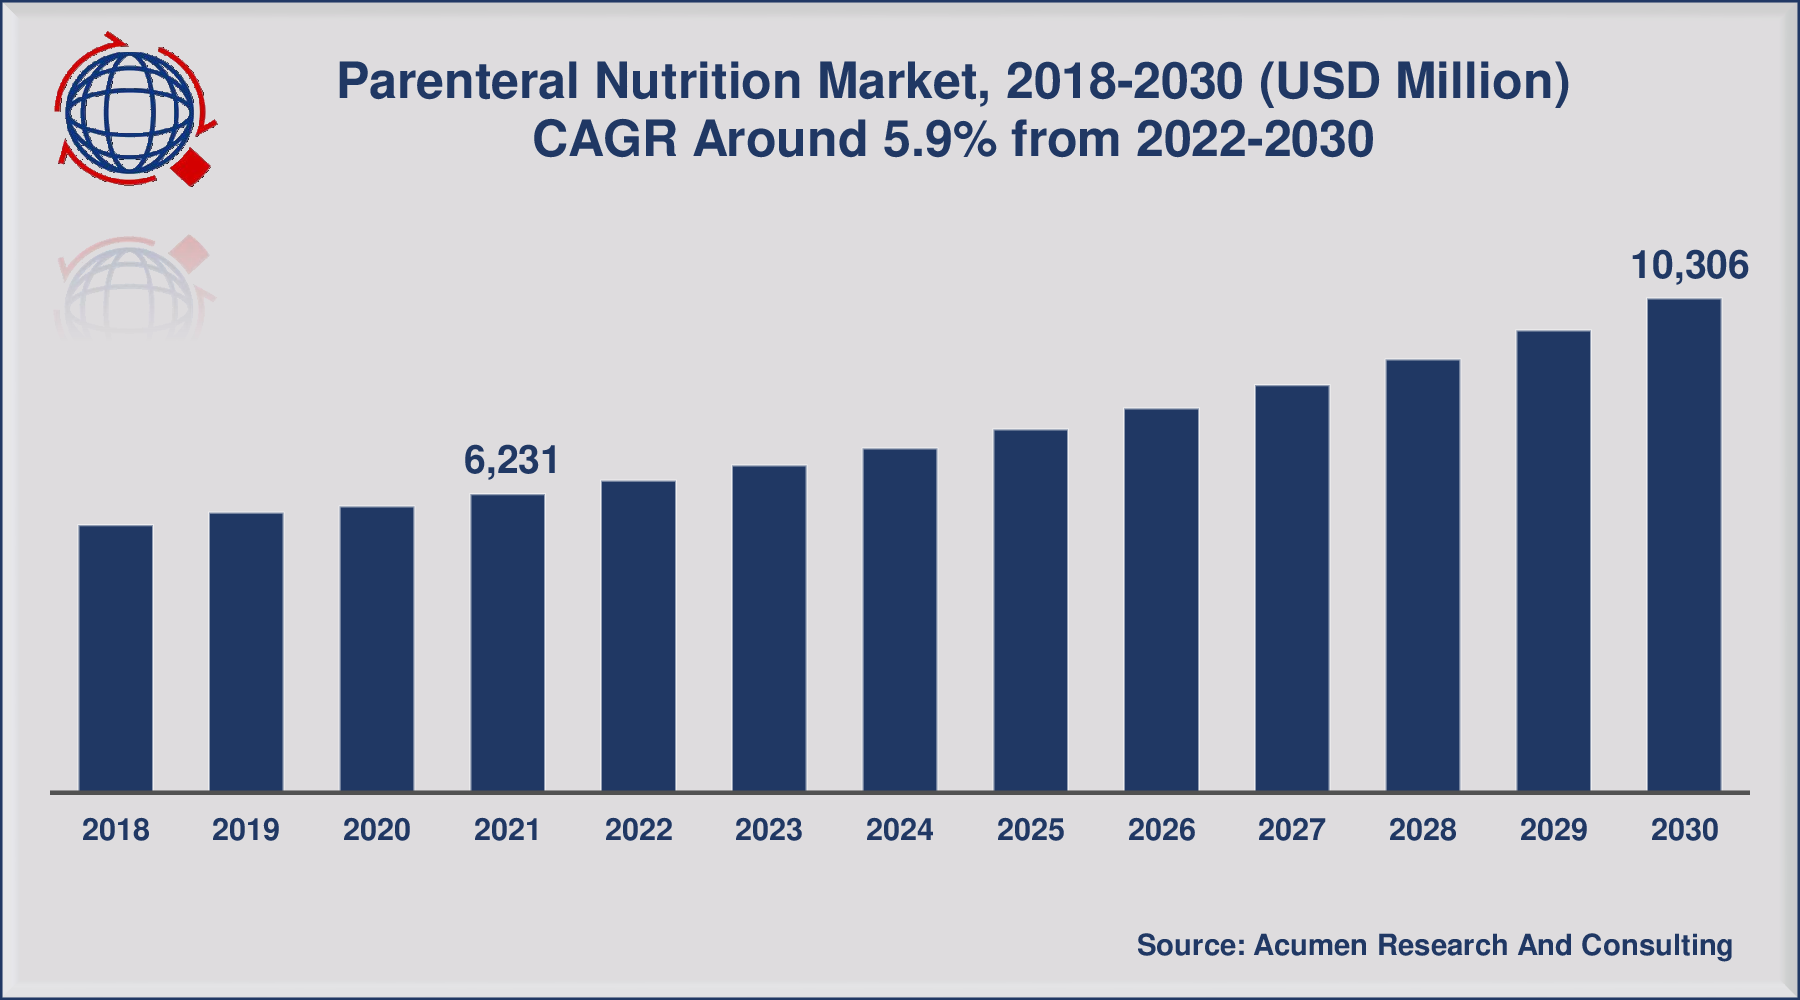 Parenteral Nutrition Market Size is expected to reach at